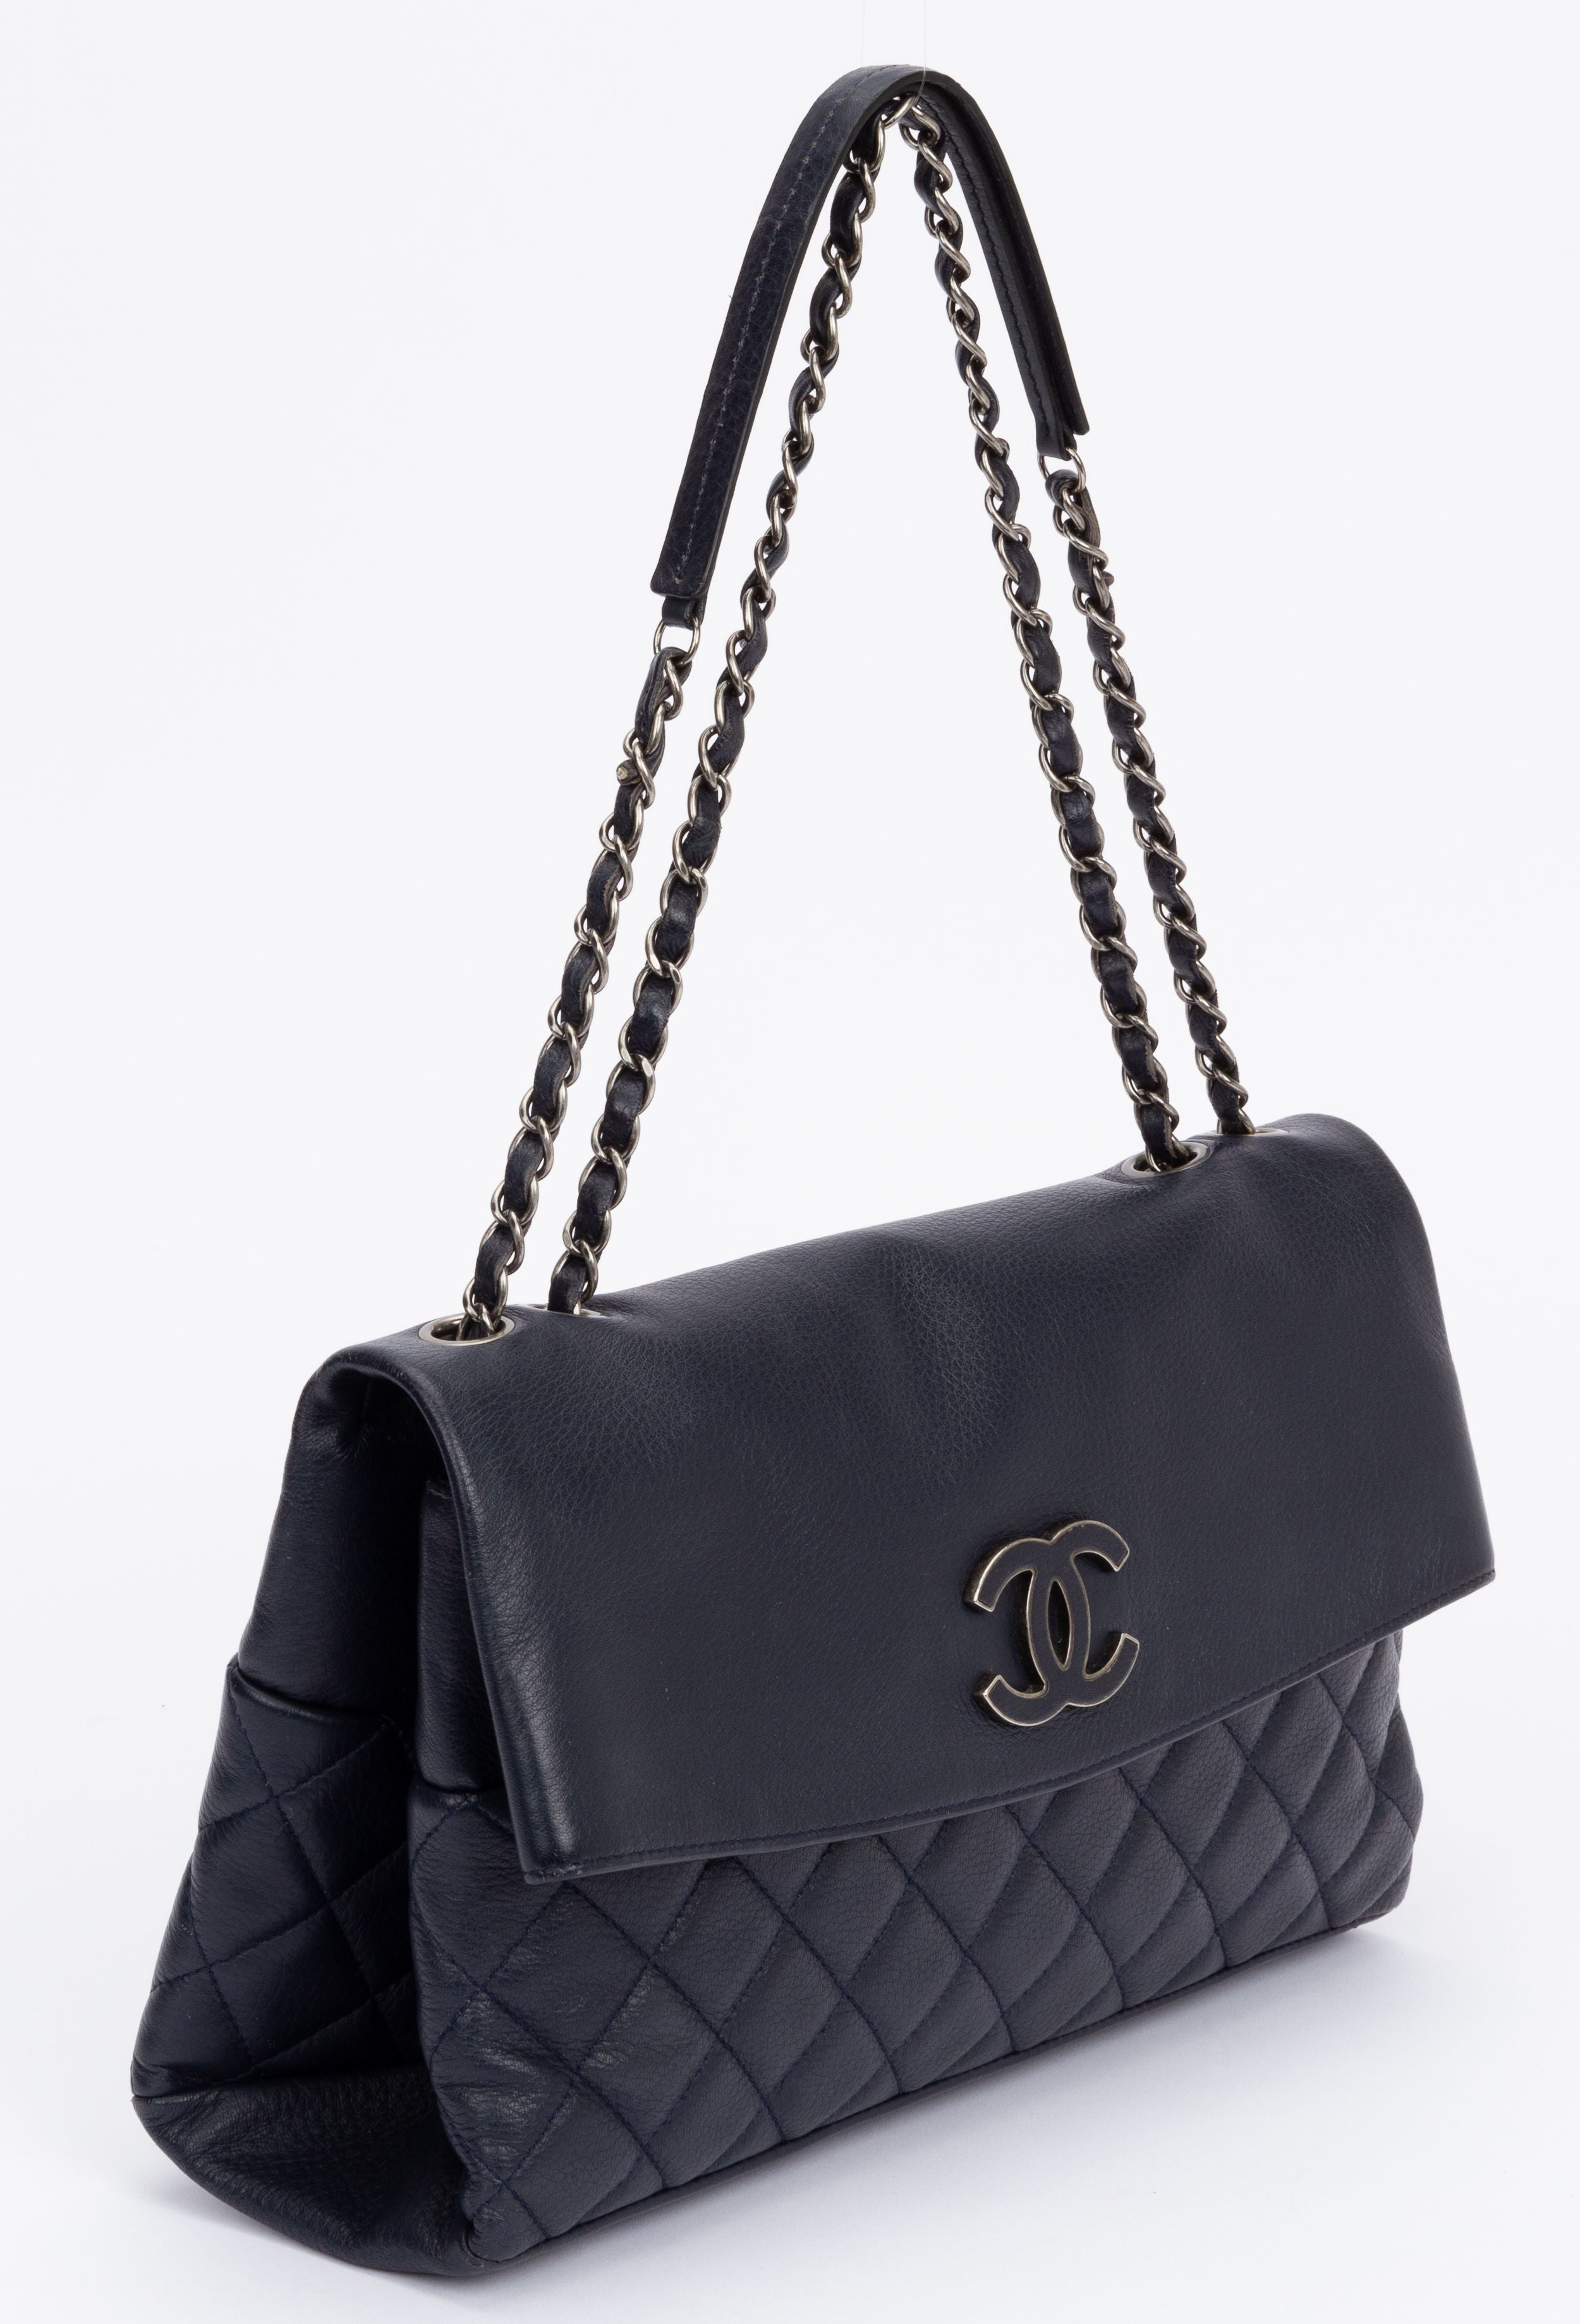 blue chanel bag outfit